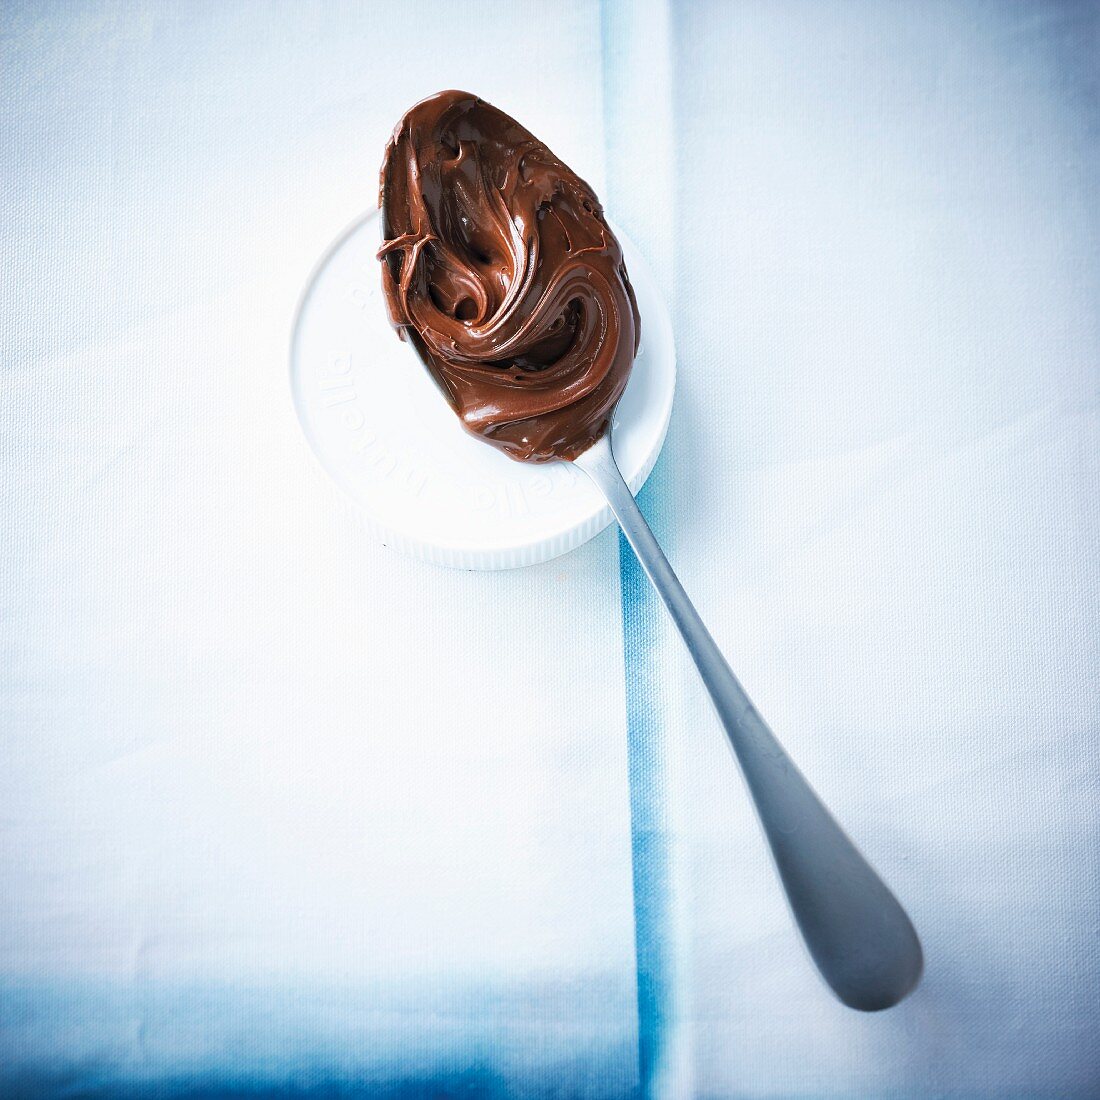 Spoonful of chocolate spread